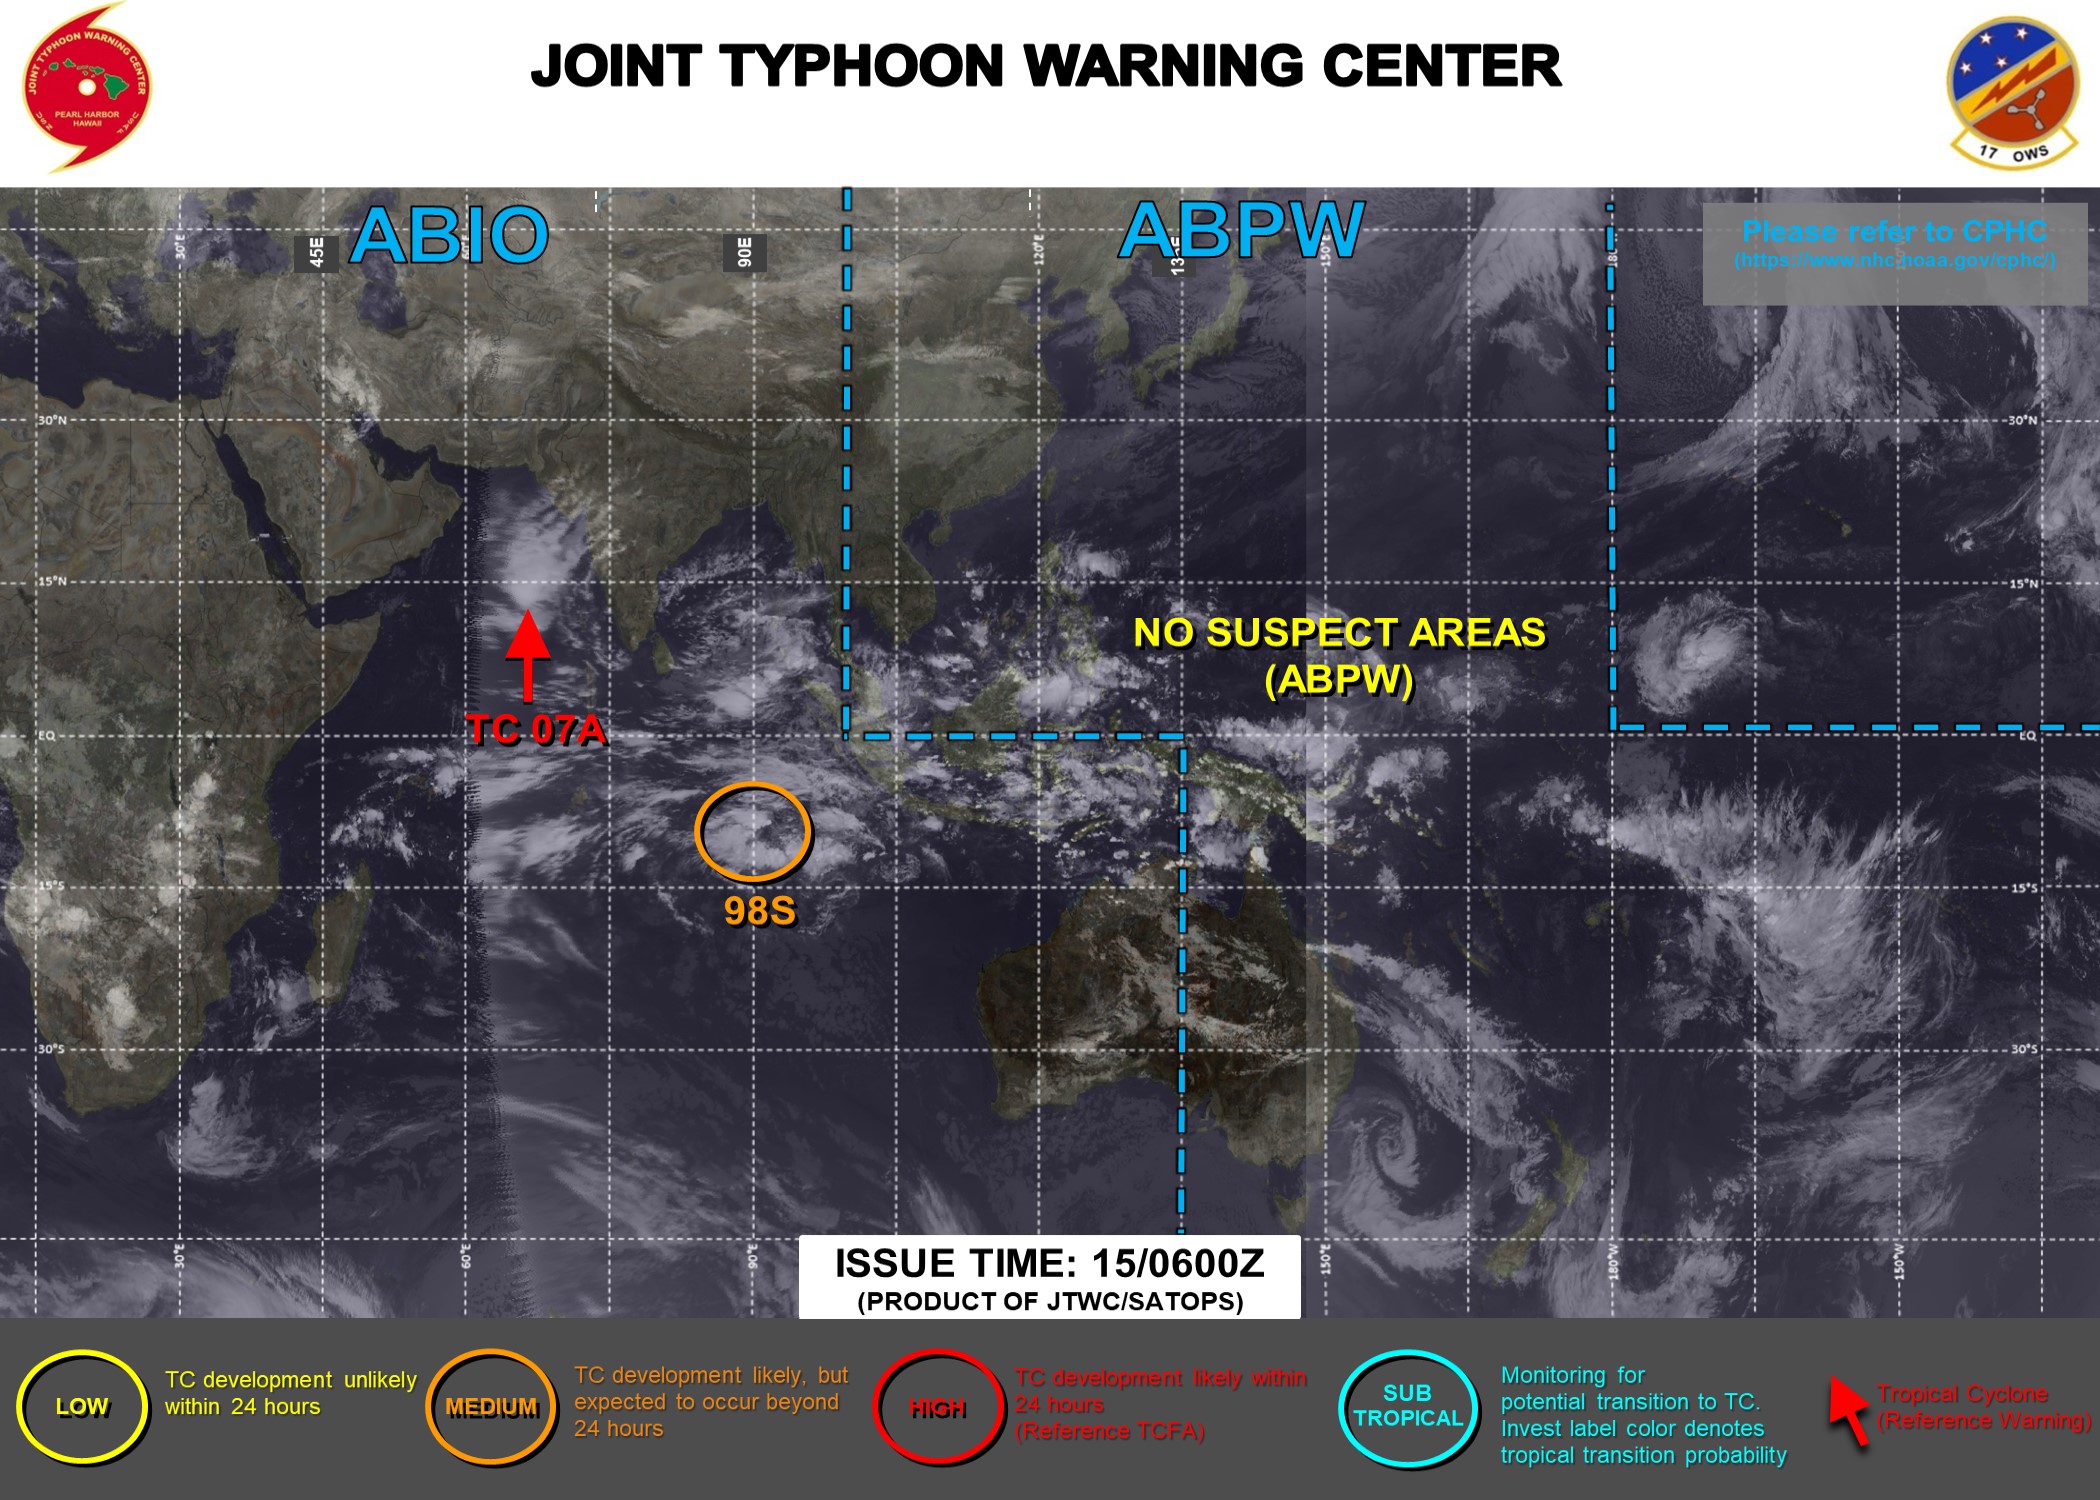 JTWC IS ISSUING 6HOURLY WARNINGS ON TC 07A. 3HOURLY SATELLITE BULLETINS ARE ISSUED ON 07A AND INVEST 98S.